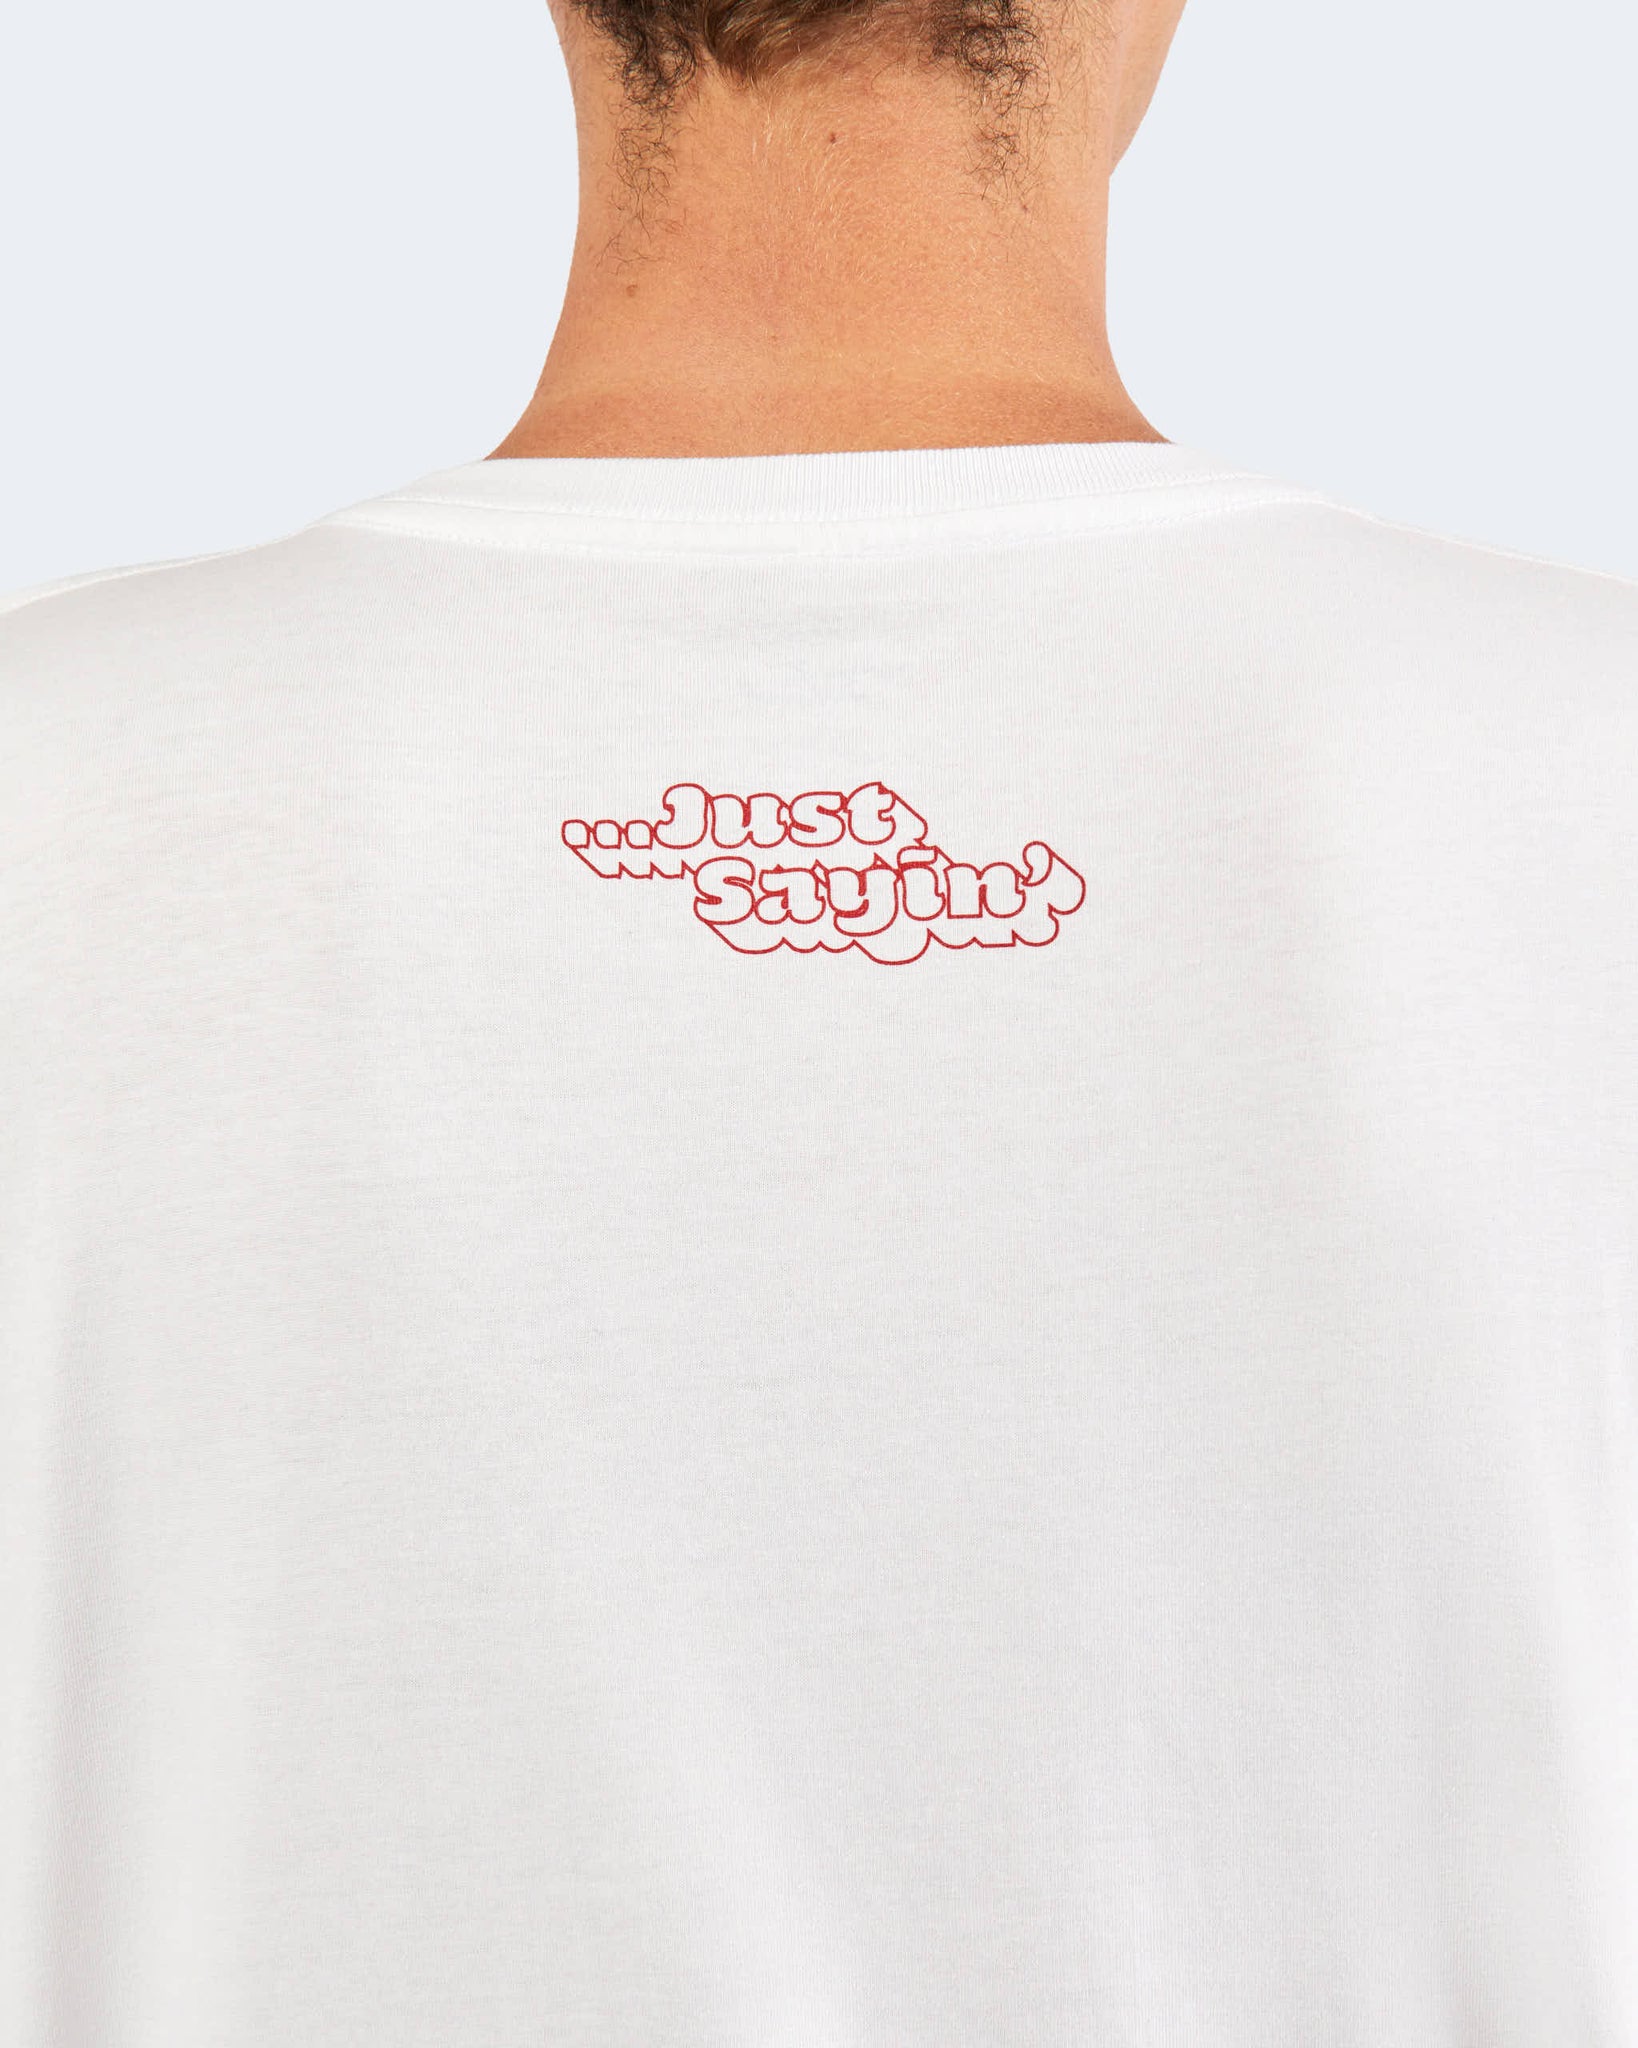 Show Appreciation Graphic Tee - Red